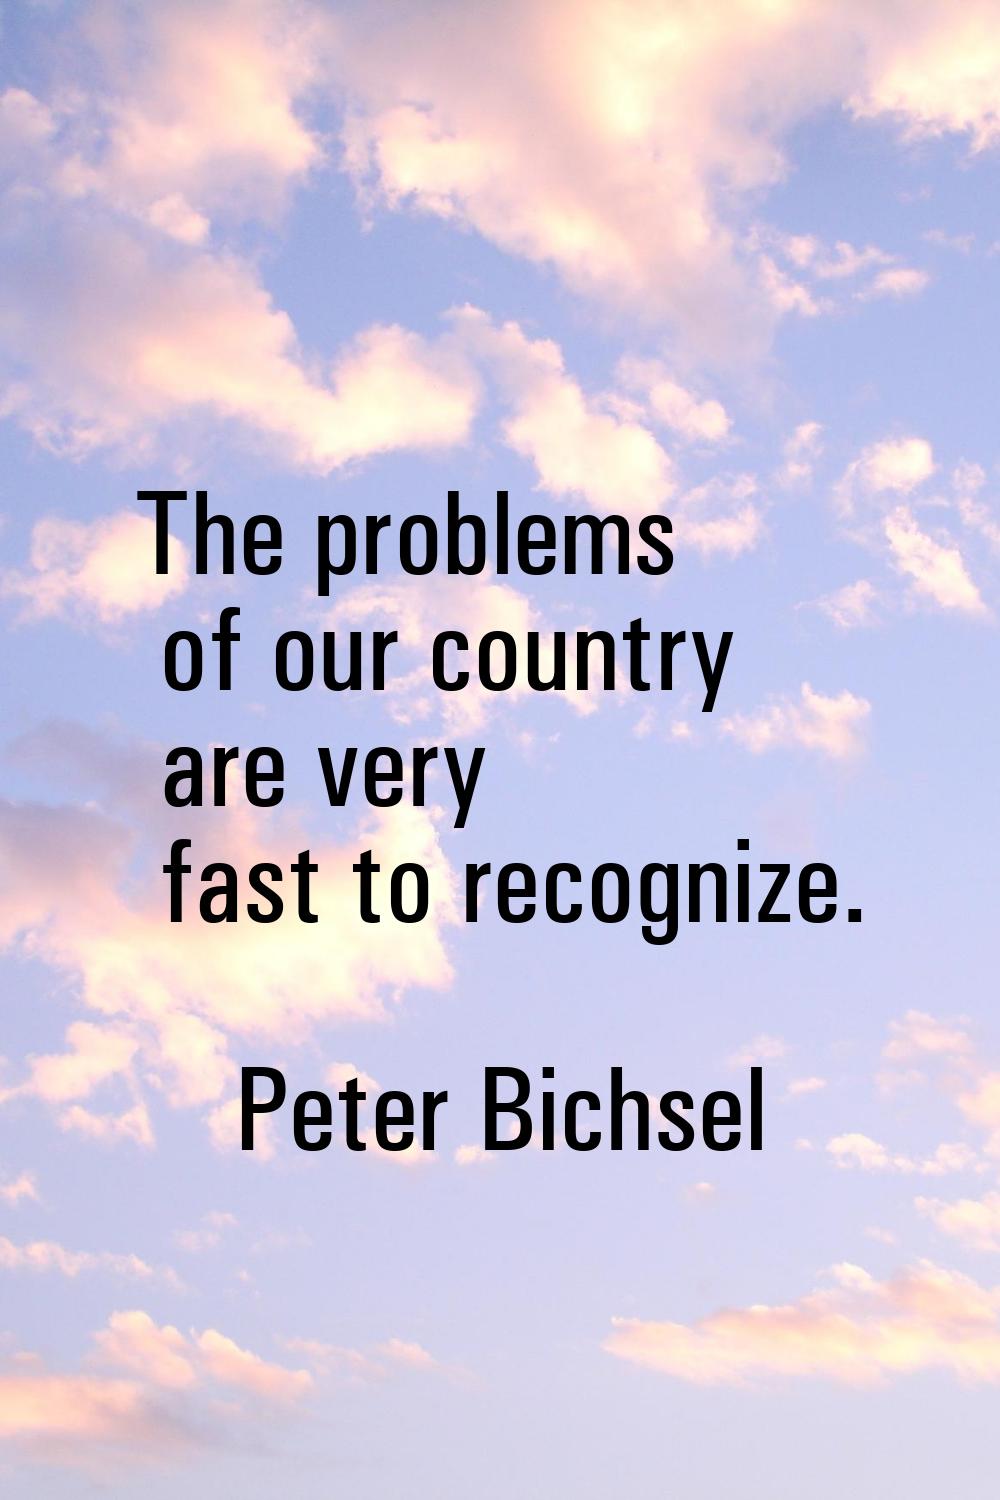 The problems of our country are very fast to recognize.